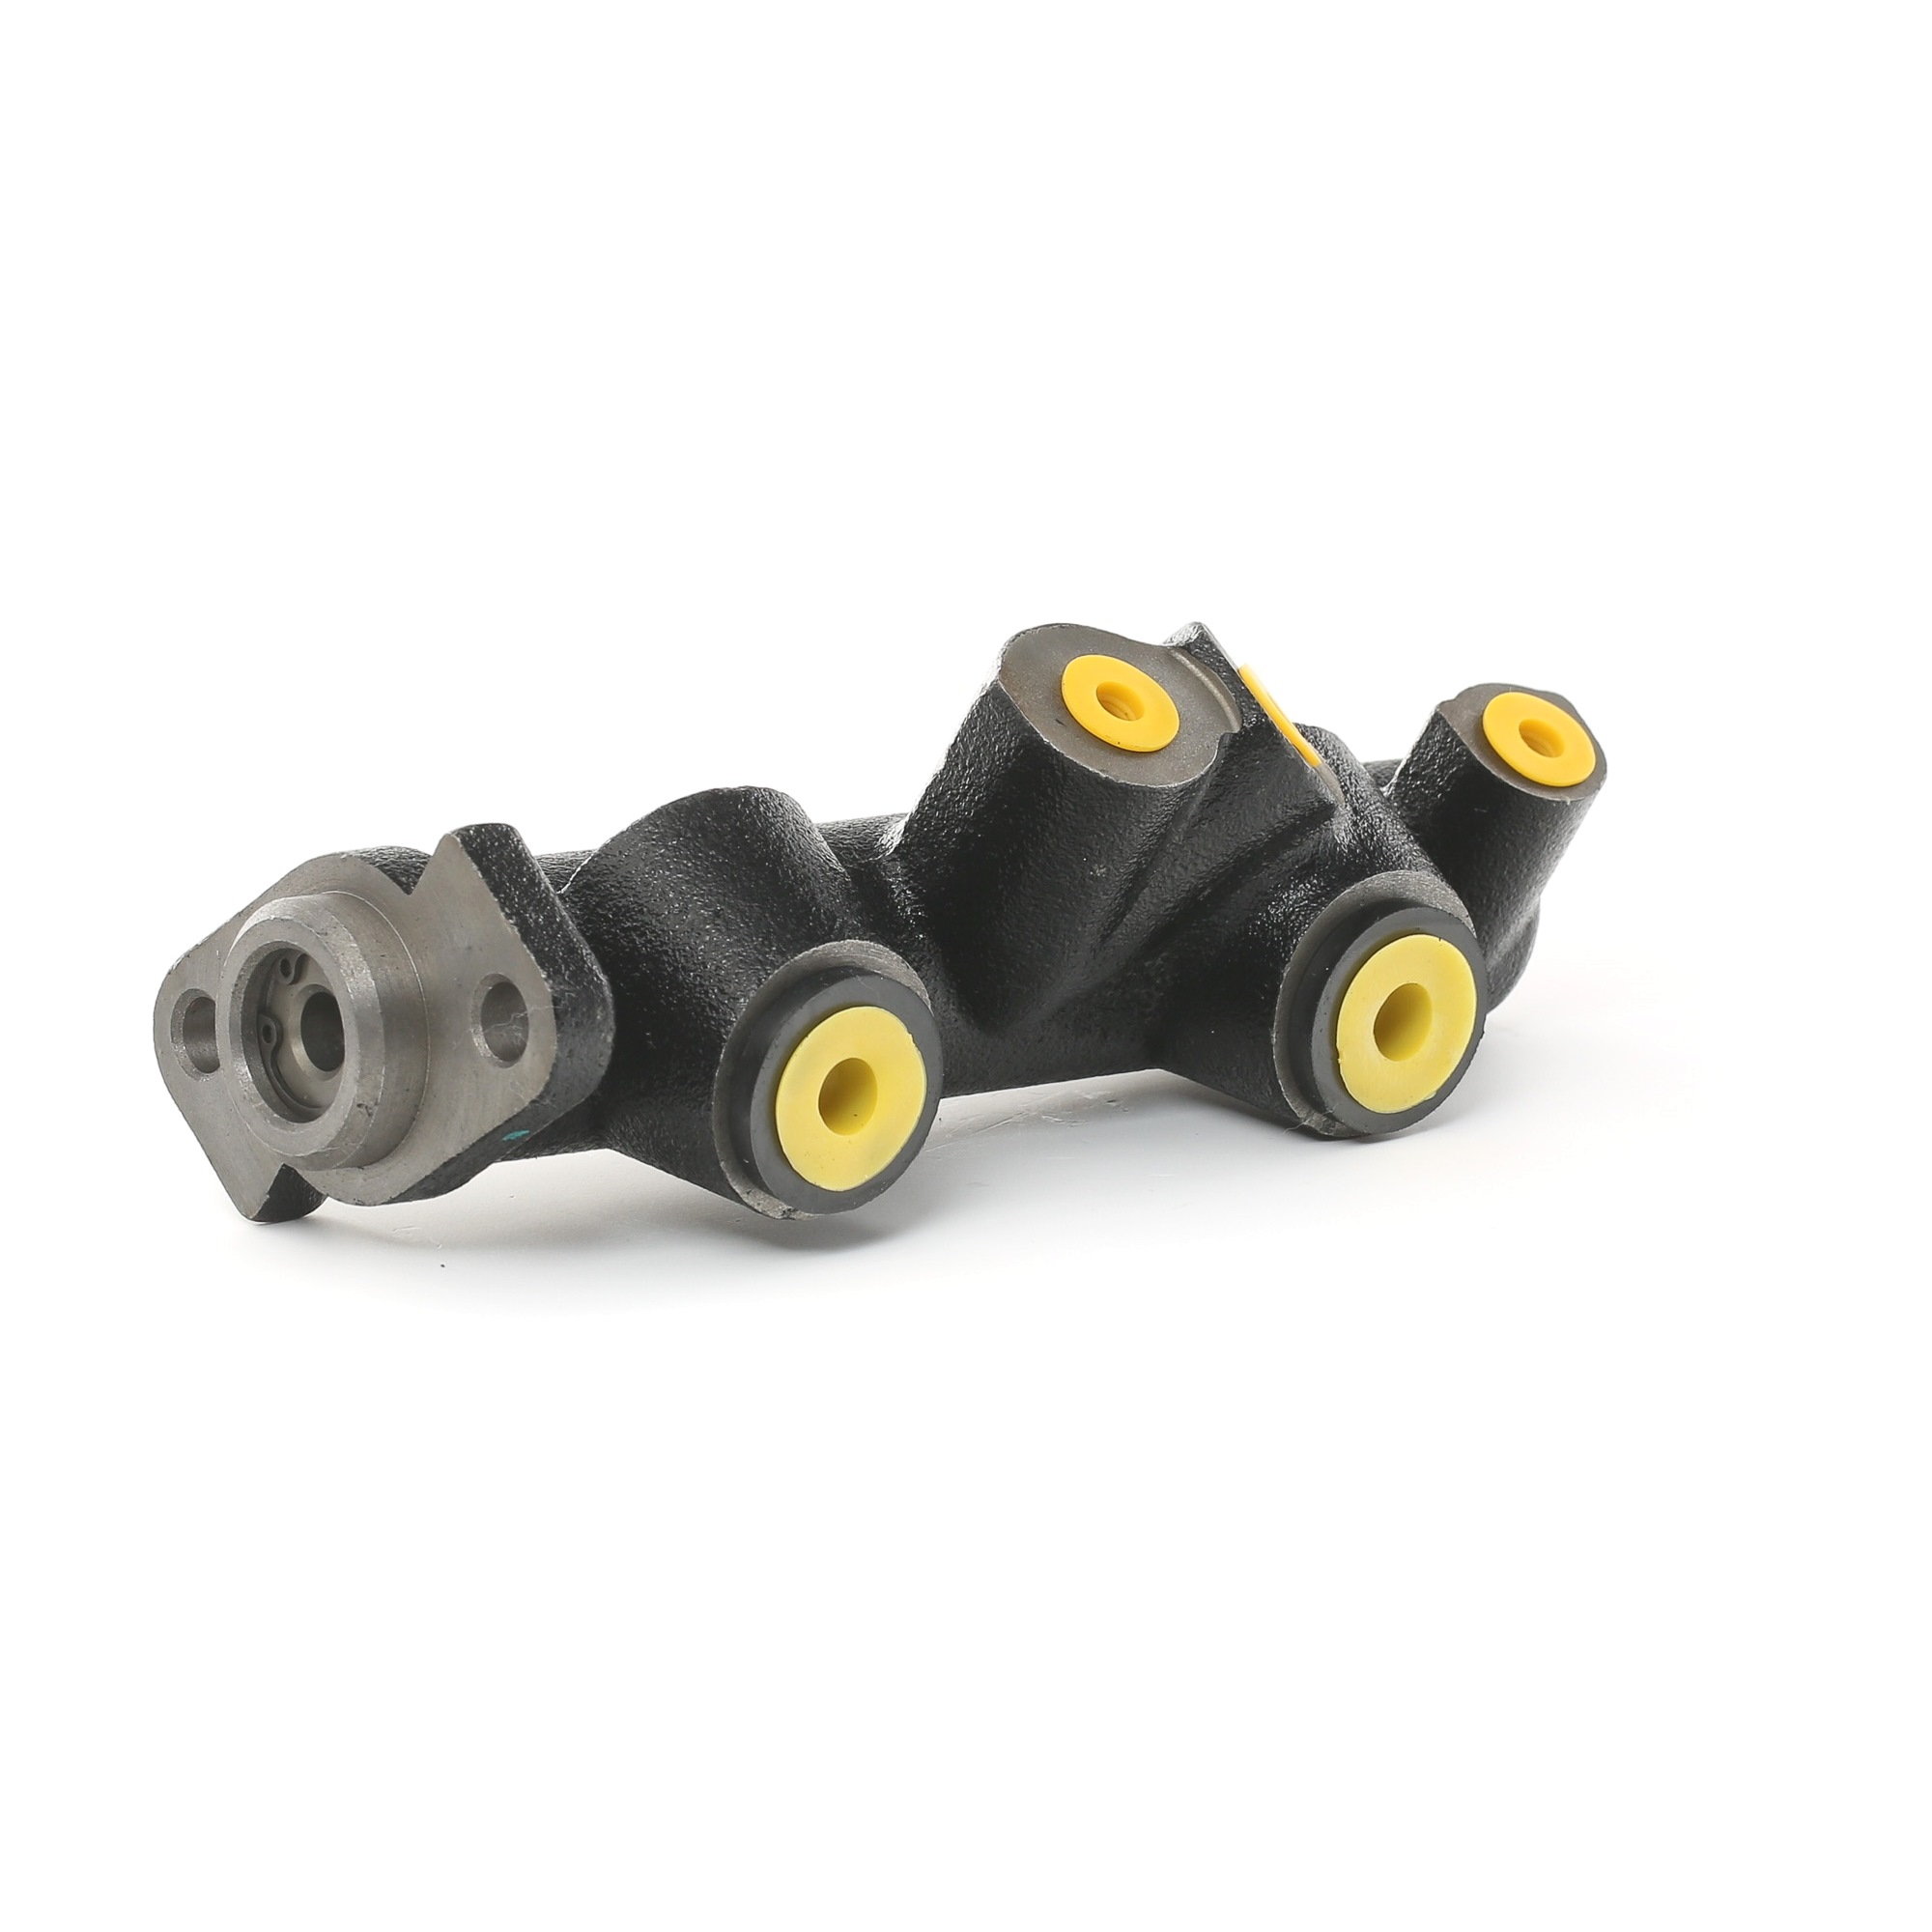 A.B.S. 1156 Brake master cylinder Number of connectors: 3, Cast Iron, 3x M10x1.0